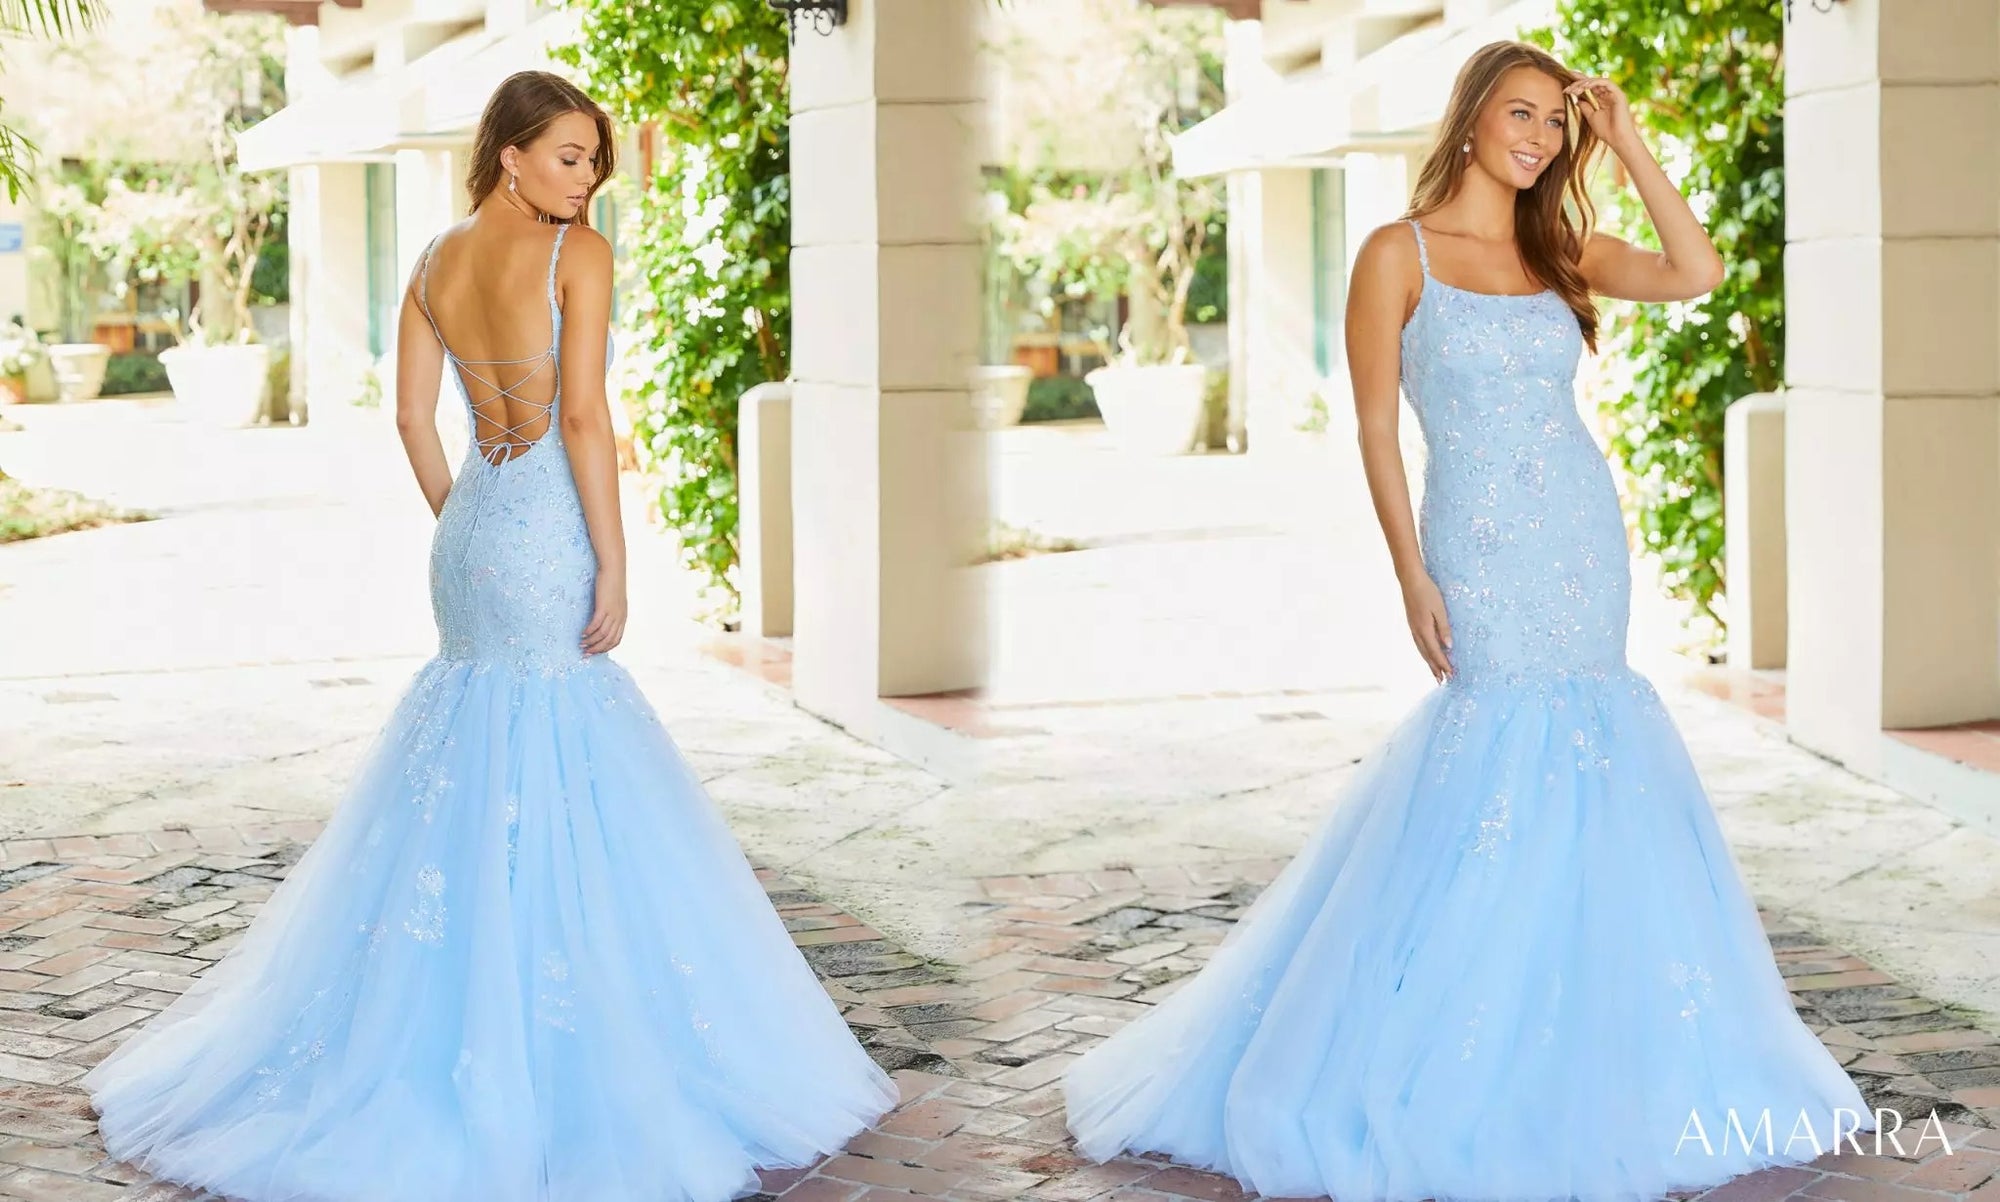 Top 5 Tips for Picking the Best Formal Dress